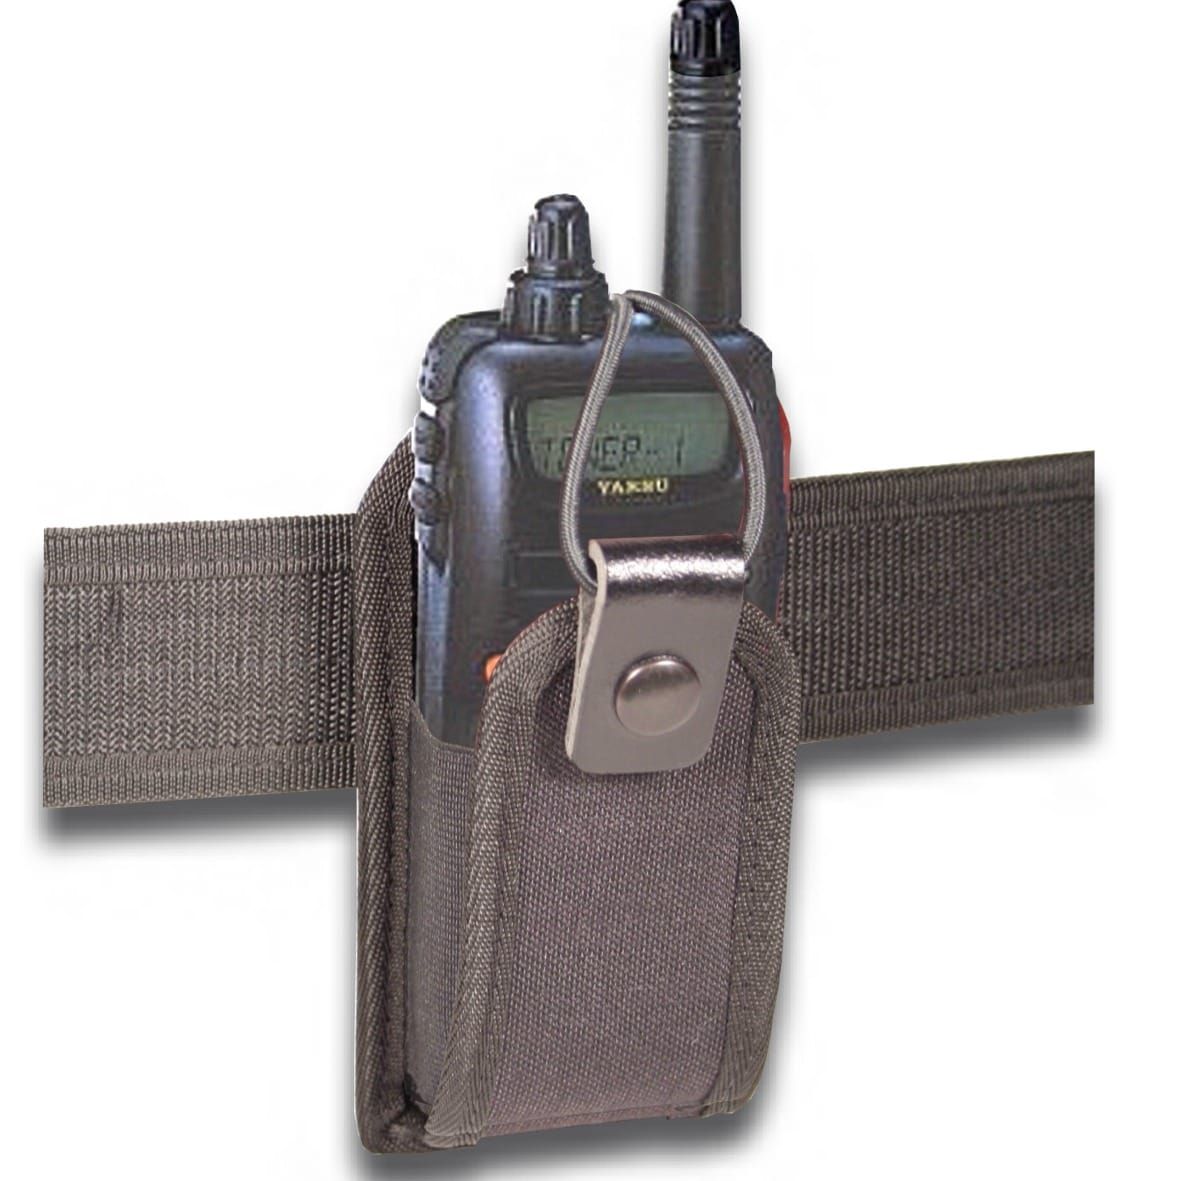 https://www.police-supplies.co.uk/media/catalog/product/cache/5cfb60ea406113b034bcbbf4758624a4/p/r/protec_rd9_universal_radio_belt_pouch.jpg